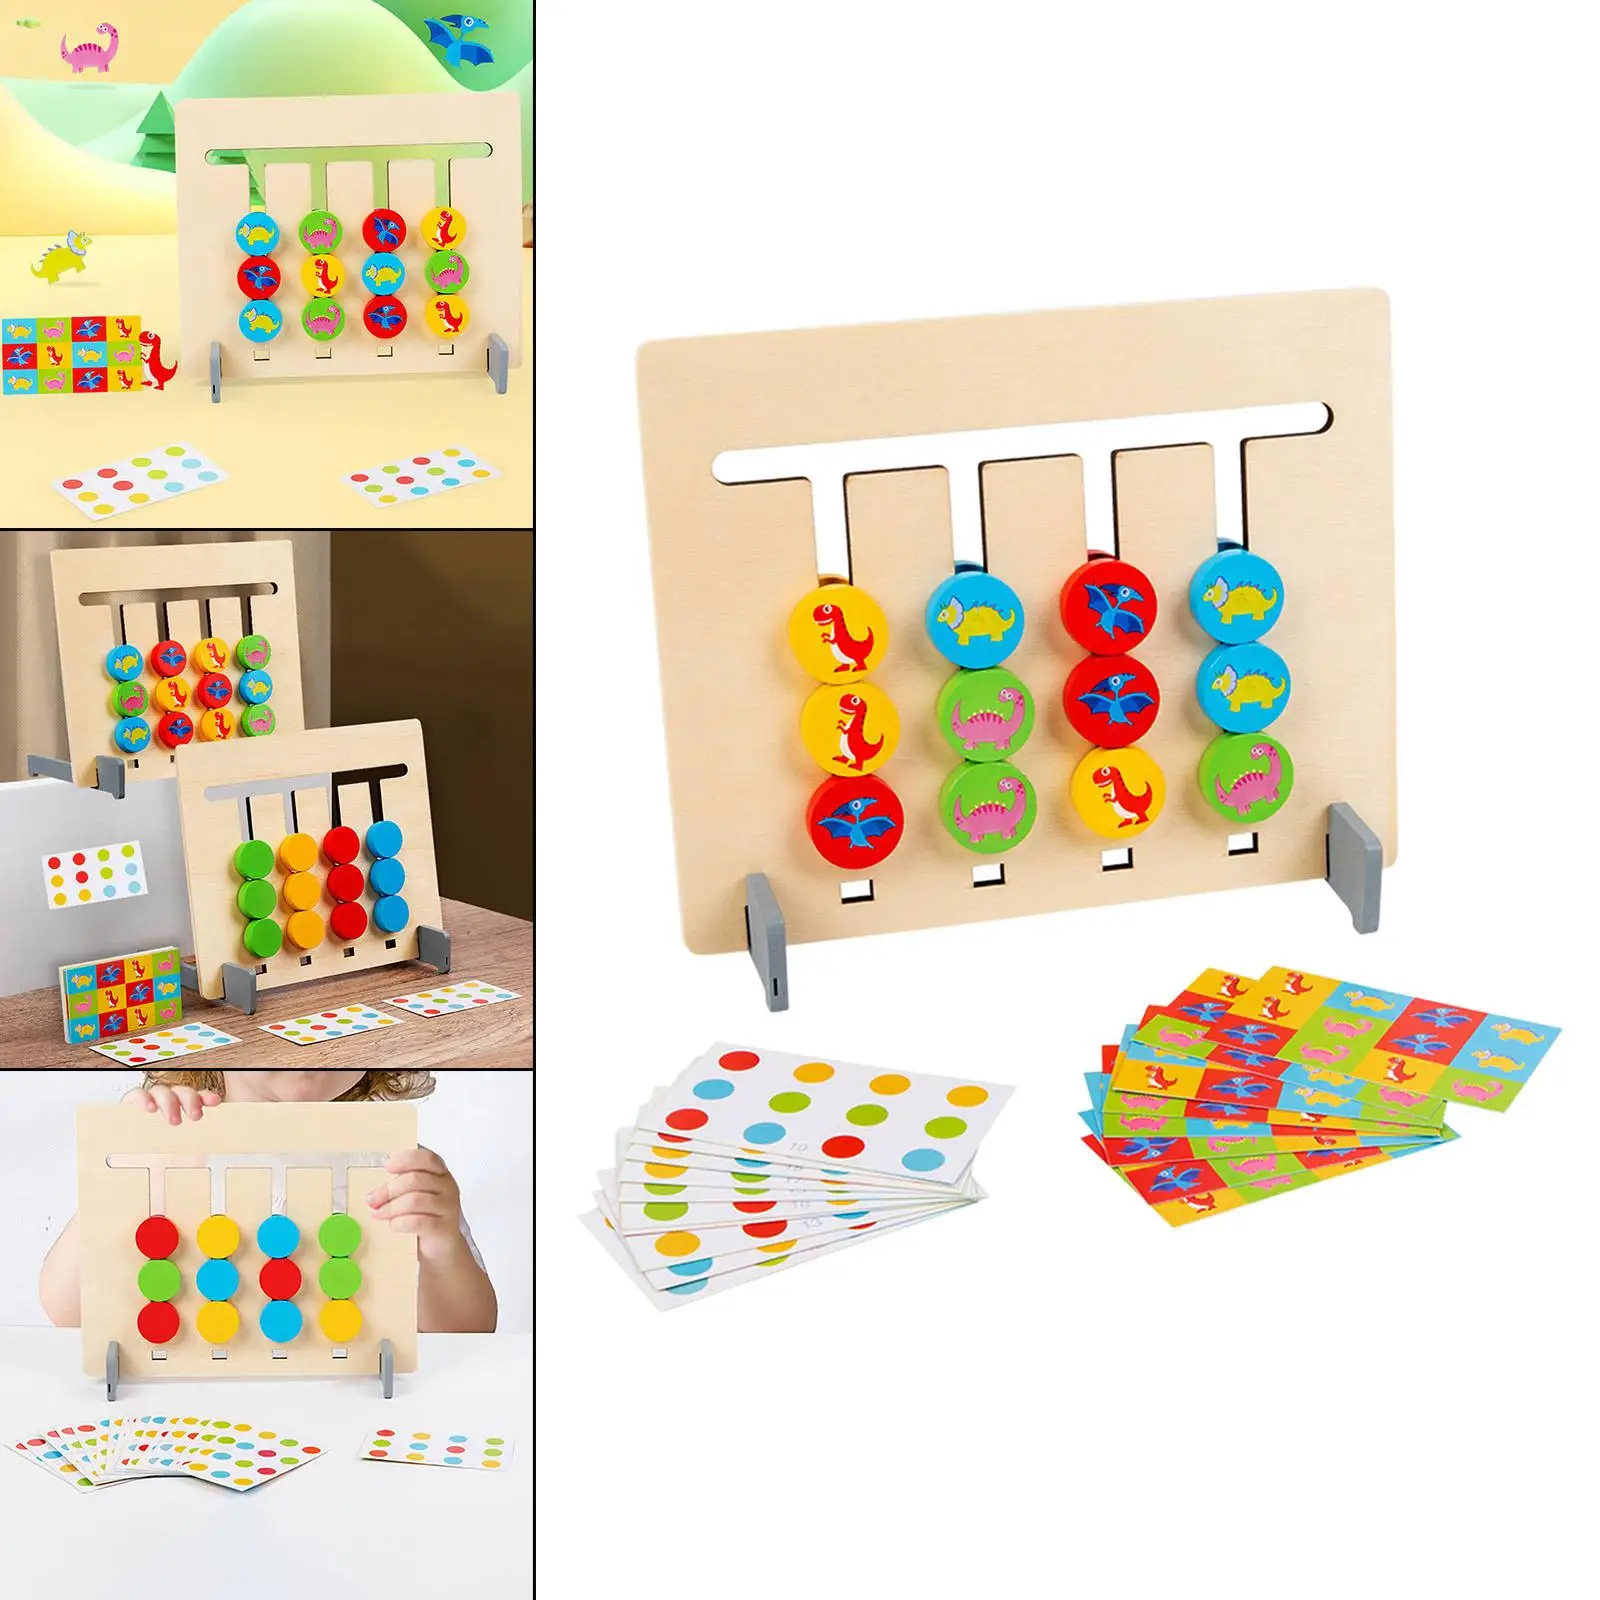 Montessori Slide Puzzle Toy Game Educational Learning Shape Color Matching Game Jigsaw Brain Teaser for Kids Children